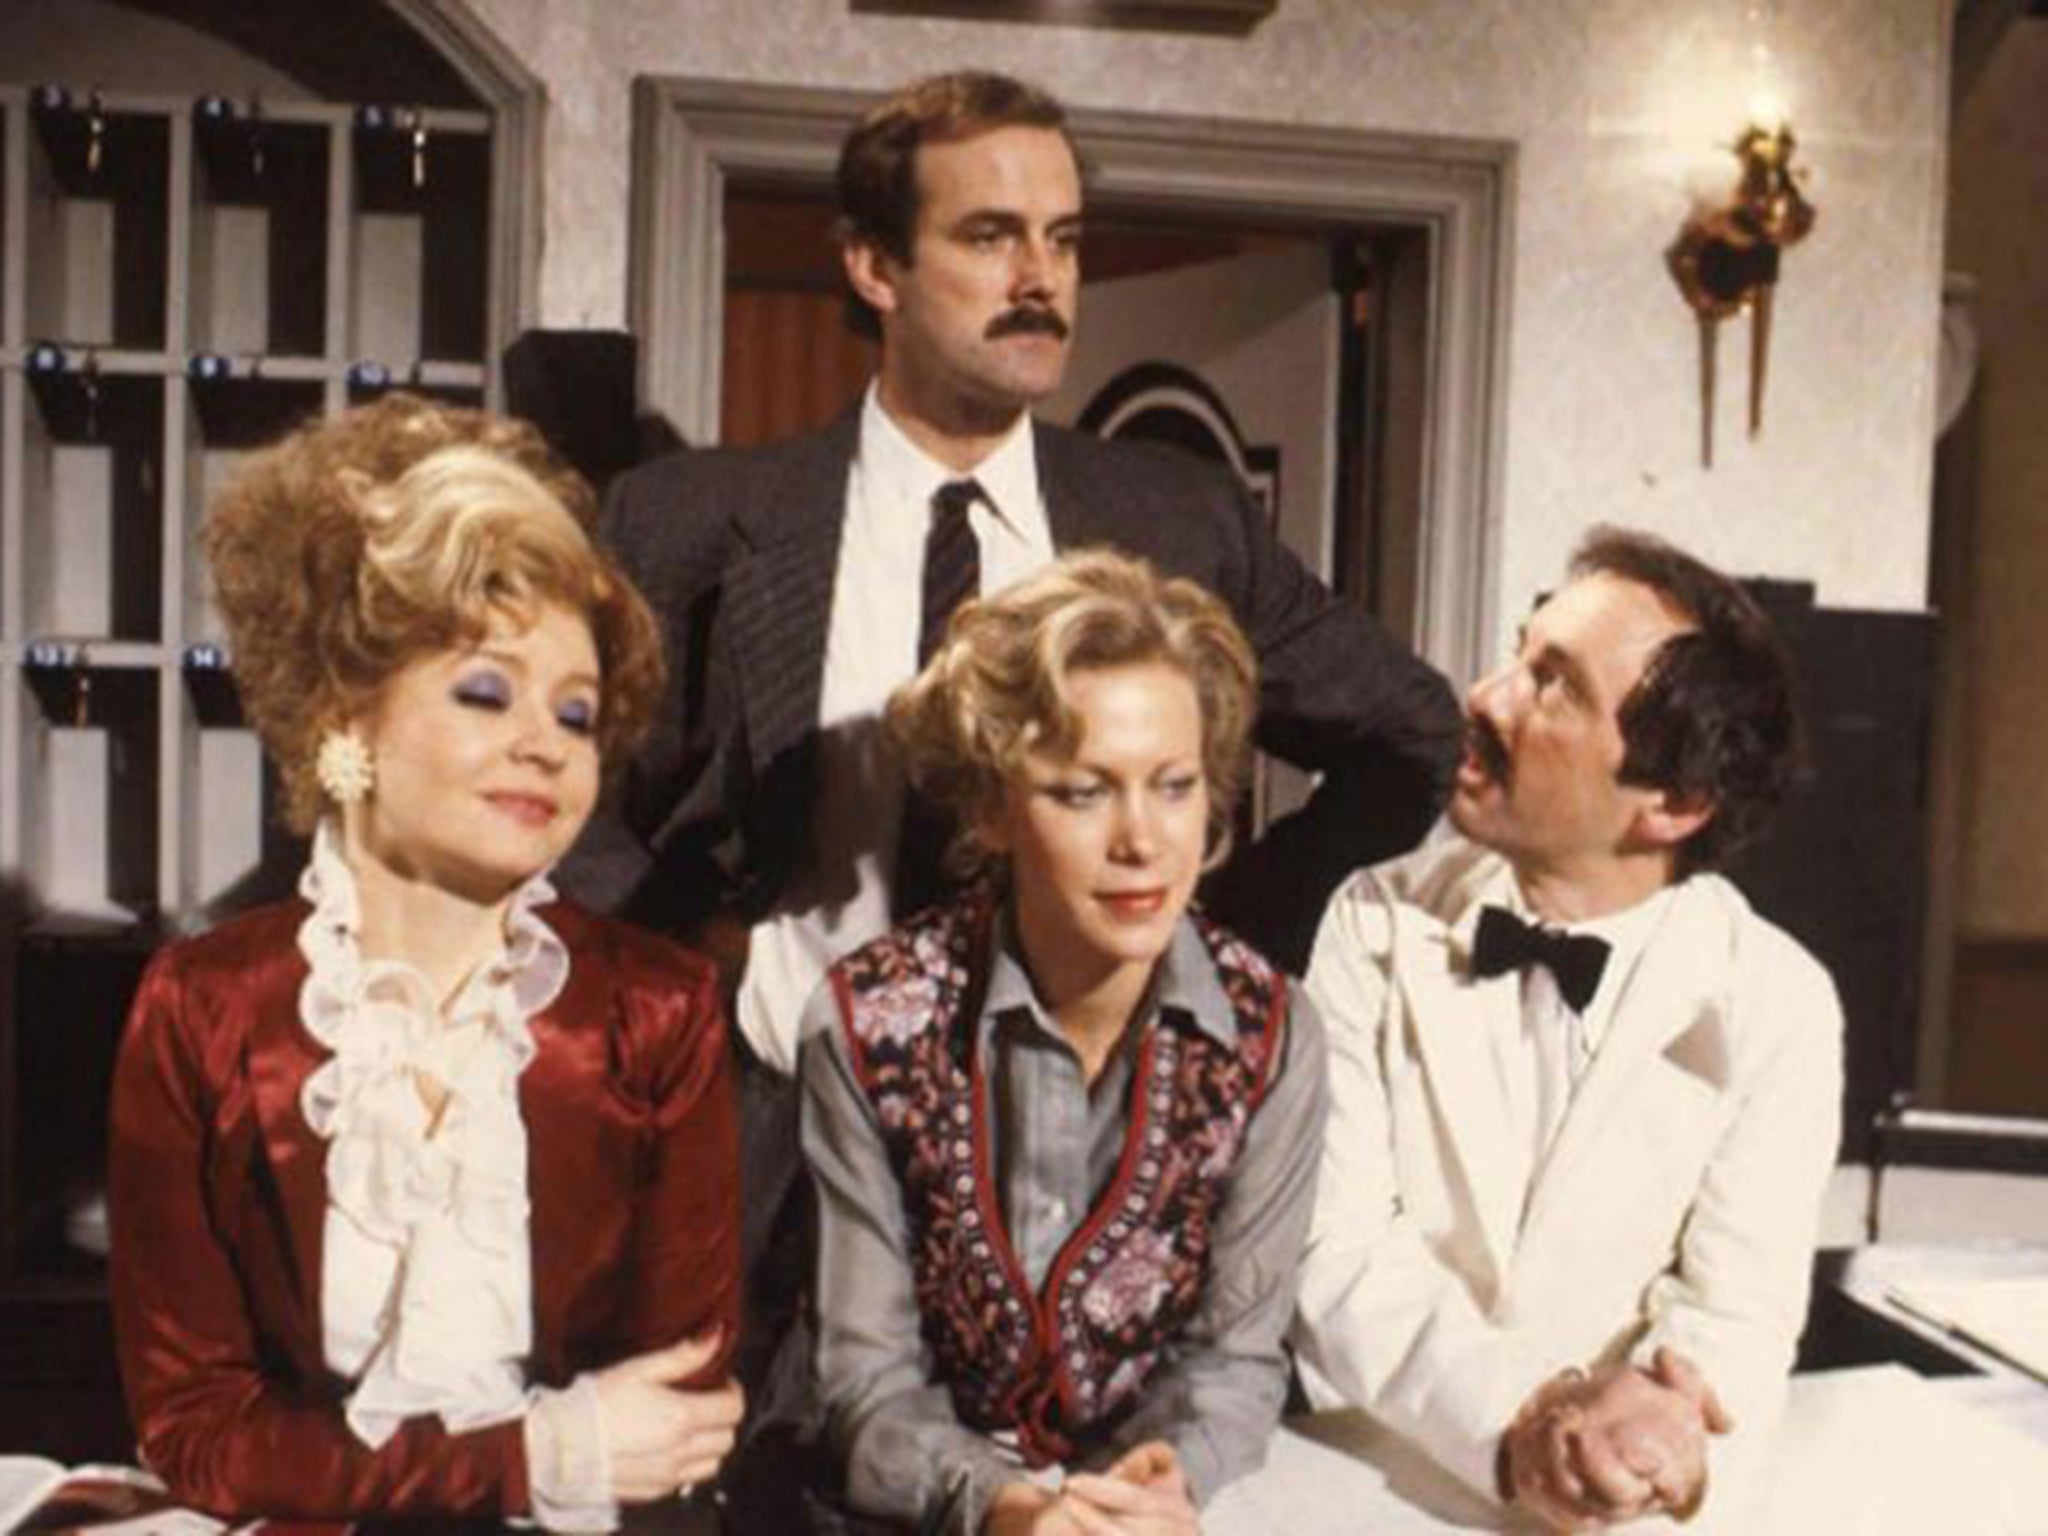 Towering achievement: John Cleese as Basil Fawlty, Prunella Scales as Sybil, Connie Booth as Polly and Andrew Sachs as Manuel 